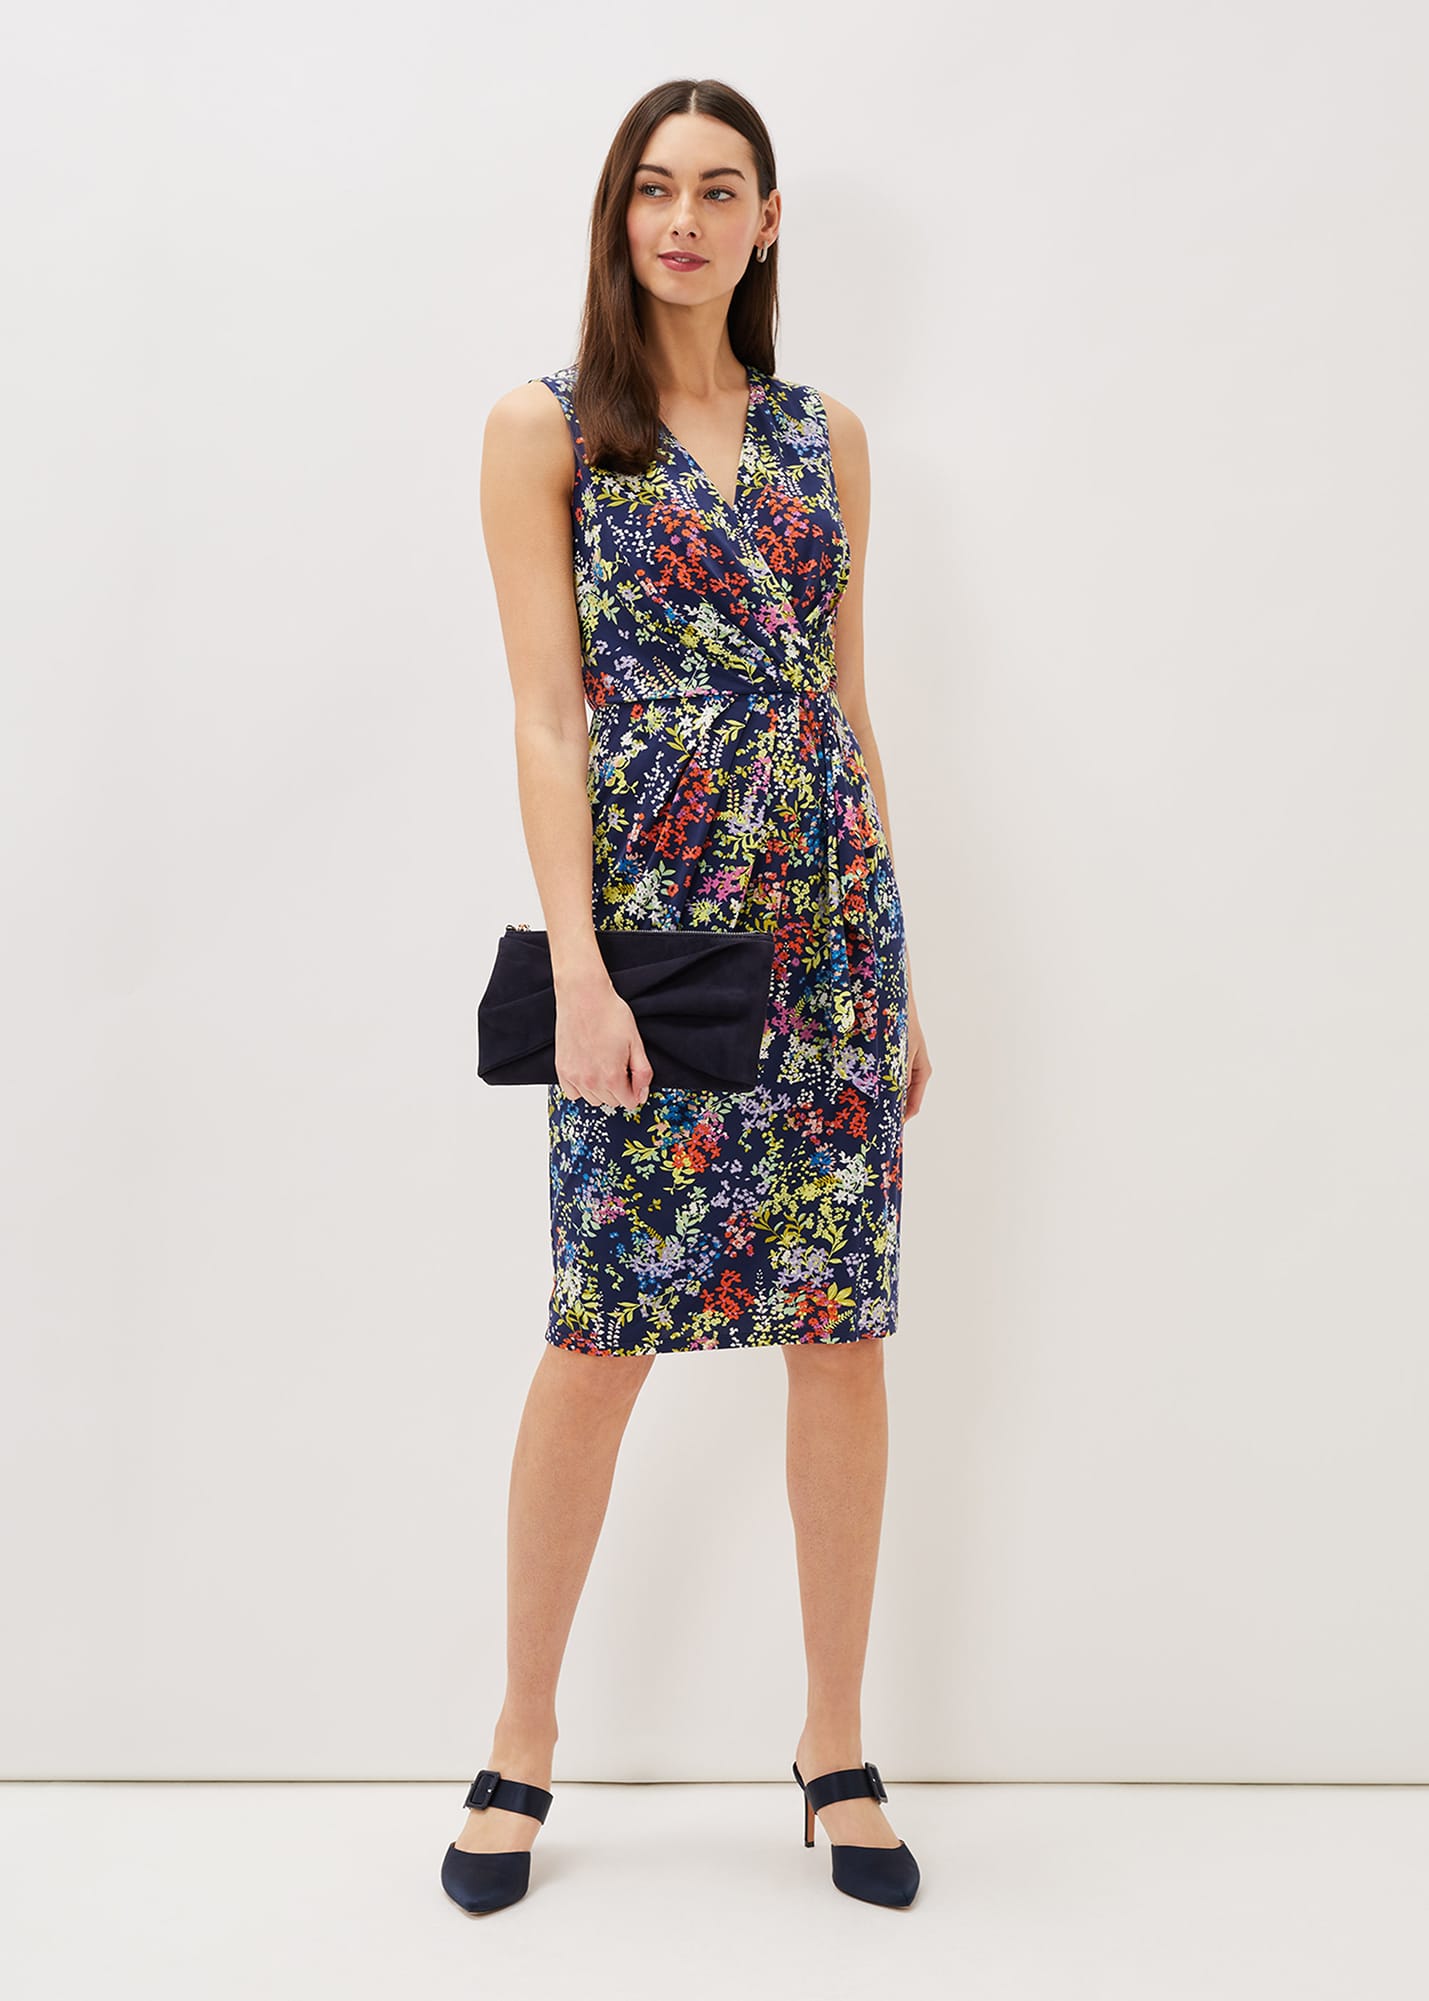 Phase Eight Women's Fenella Floral Jersey Dress